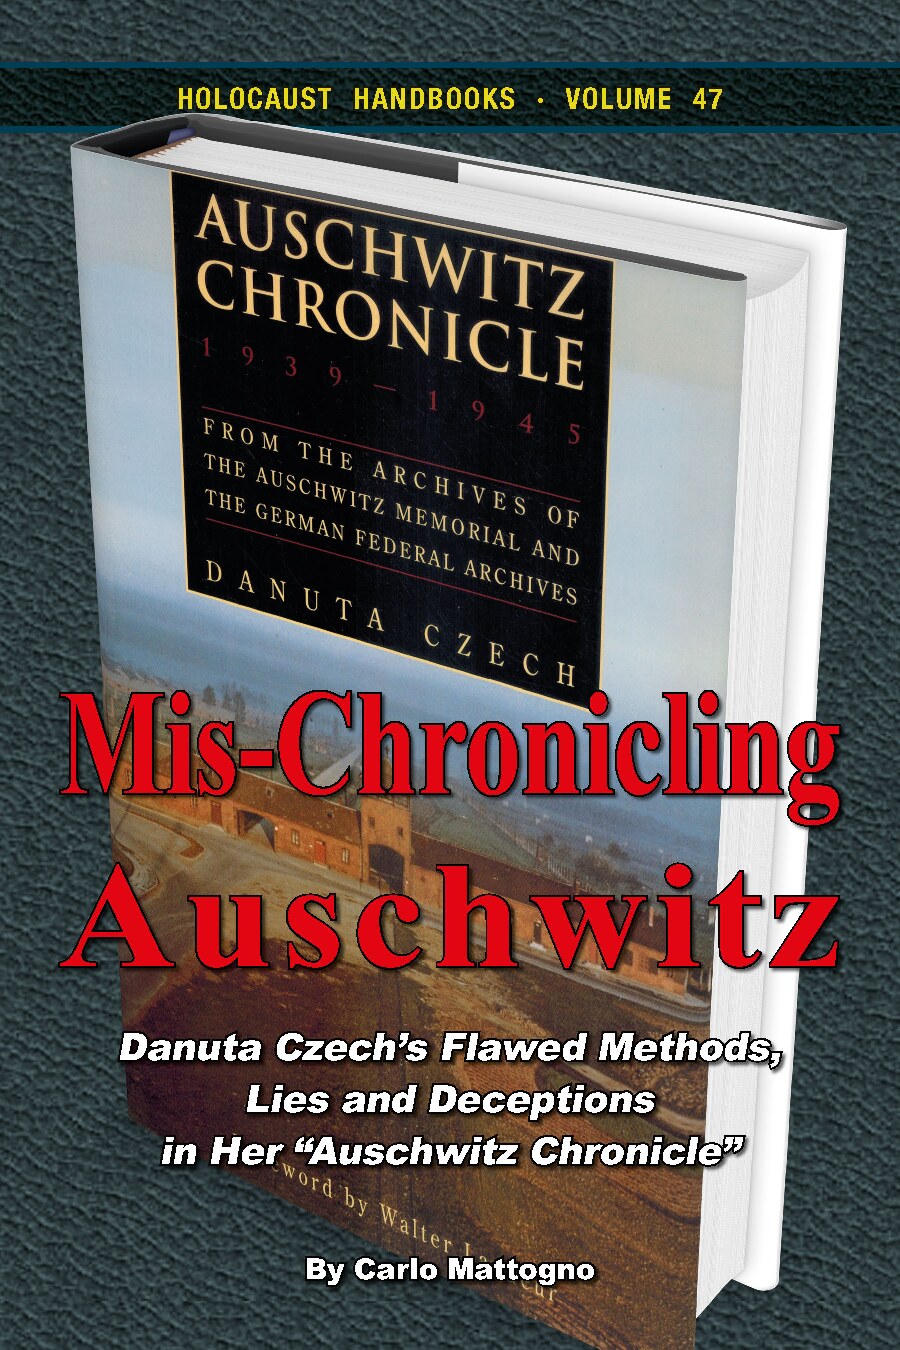 Mis-Chronicling Auschwitz: Danuta Czech’s Flawed Methods, Lies and Deceptions in Her “Auschwitz Chronicle”